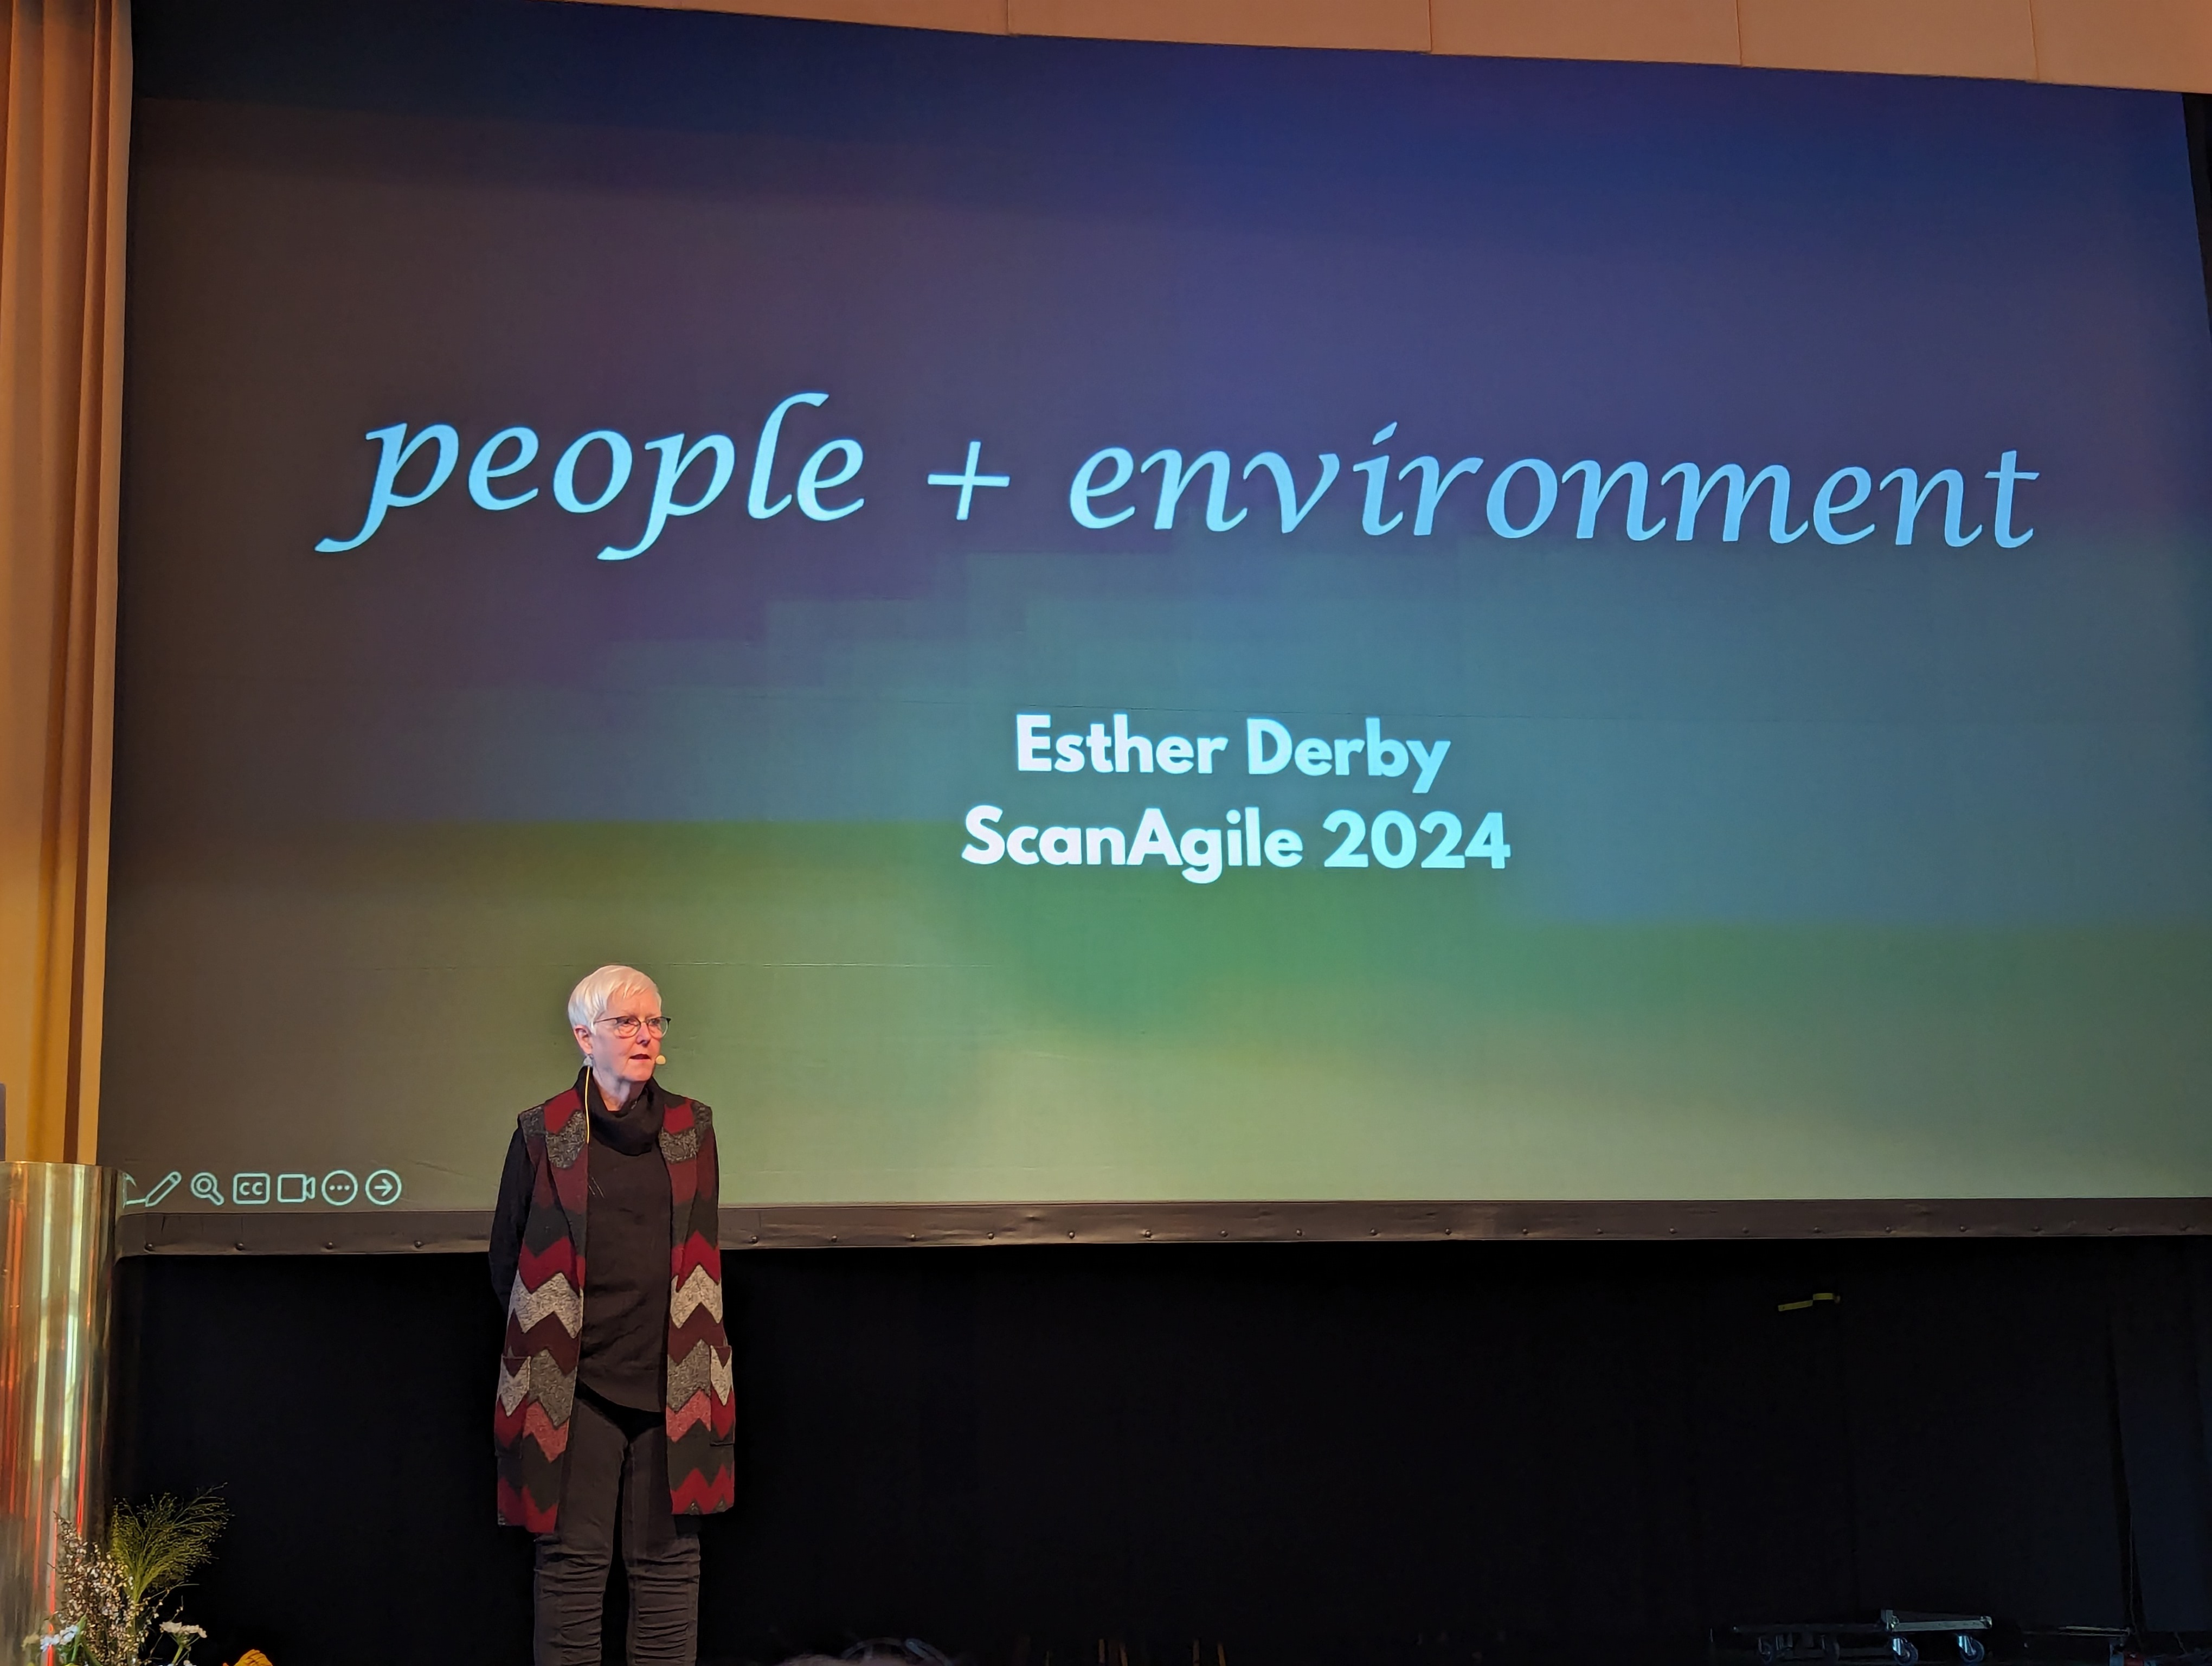 Esther Derby standing on stage with her presentation in the background showing the title &ldquo;people + environment&rdquo;.